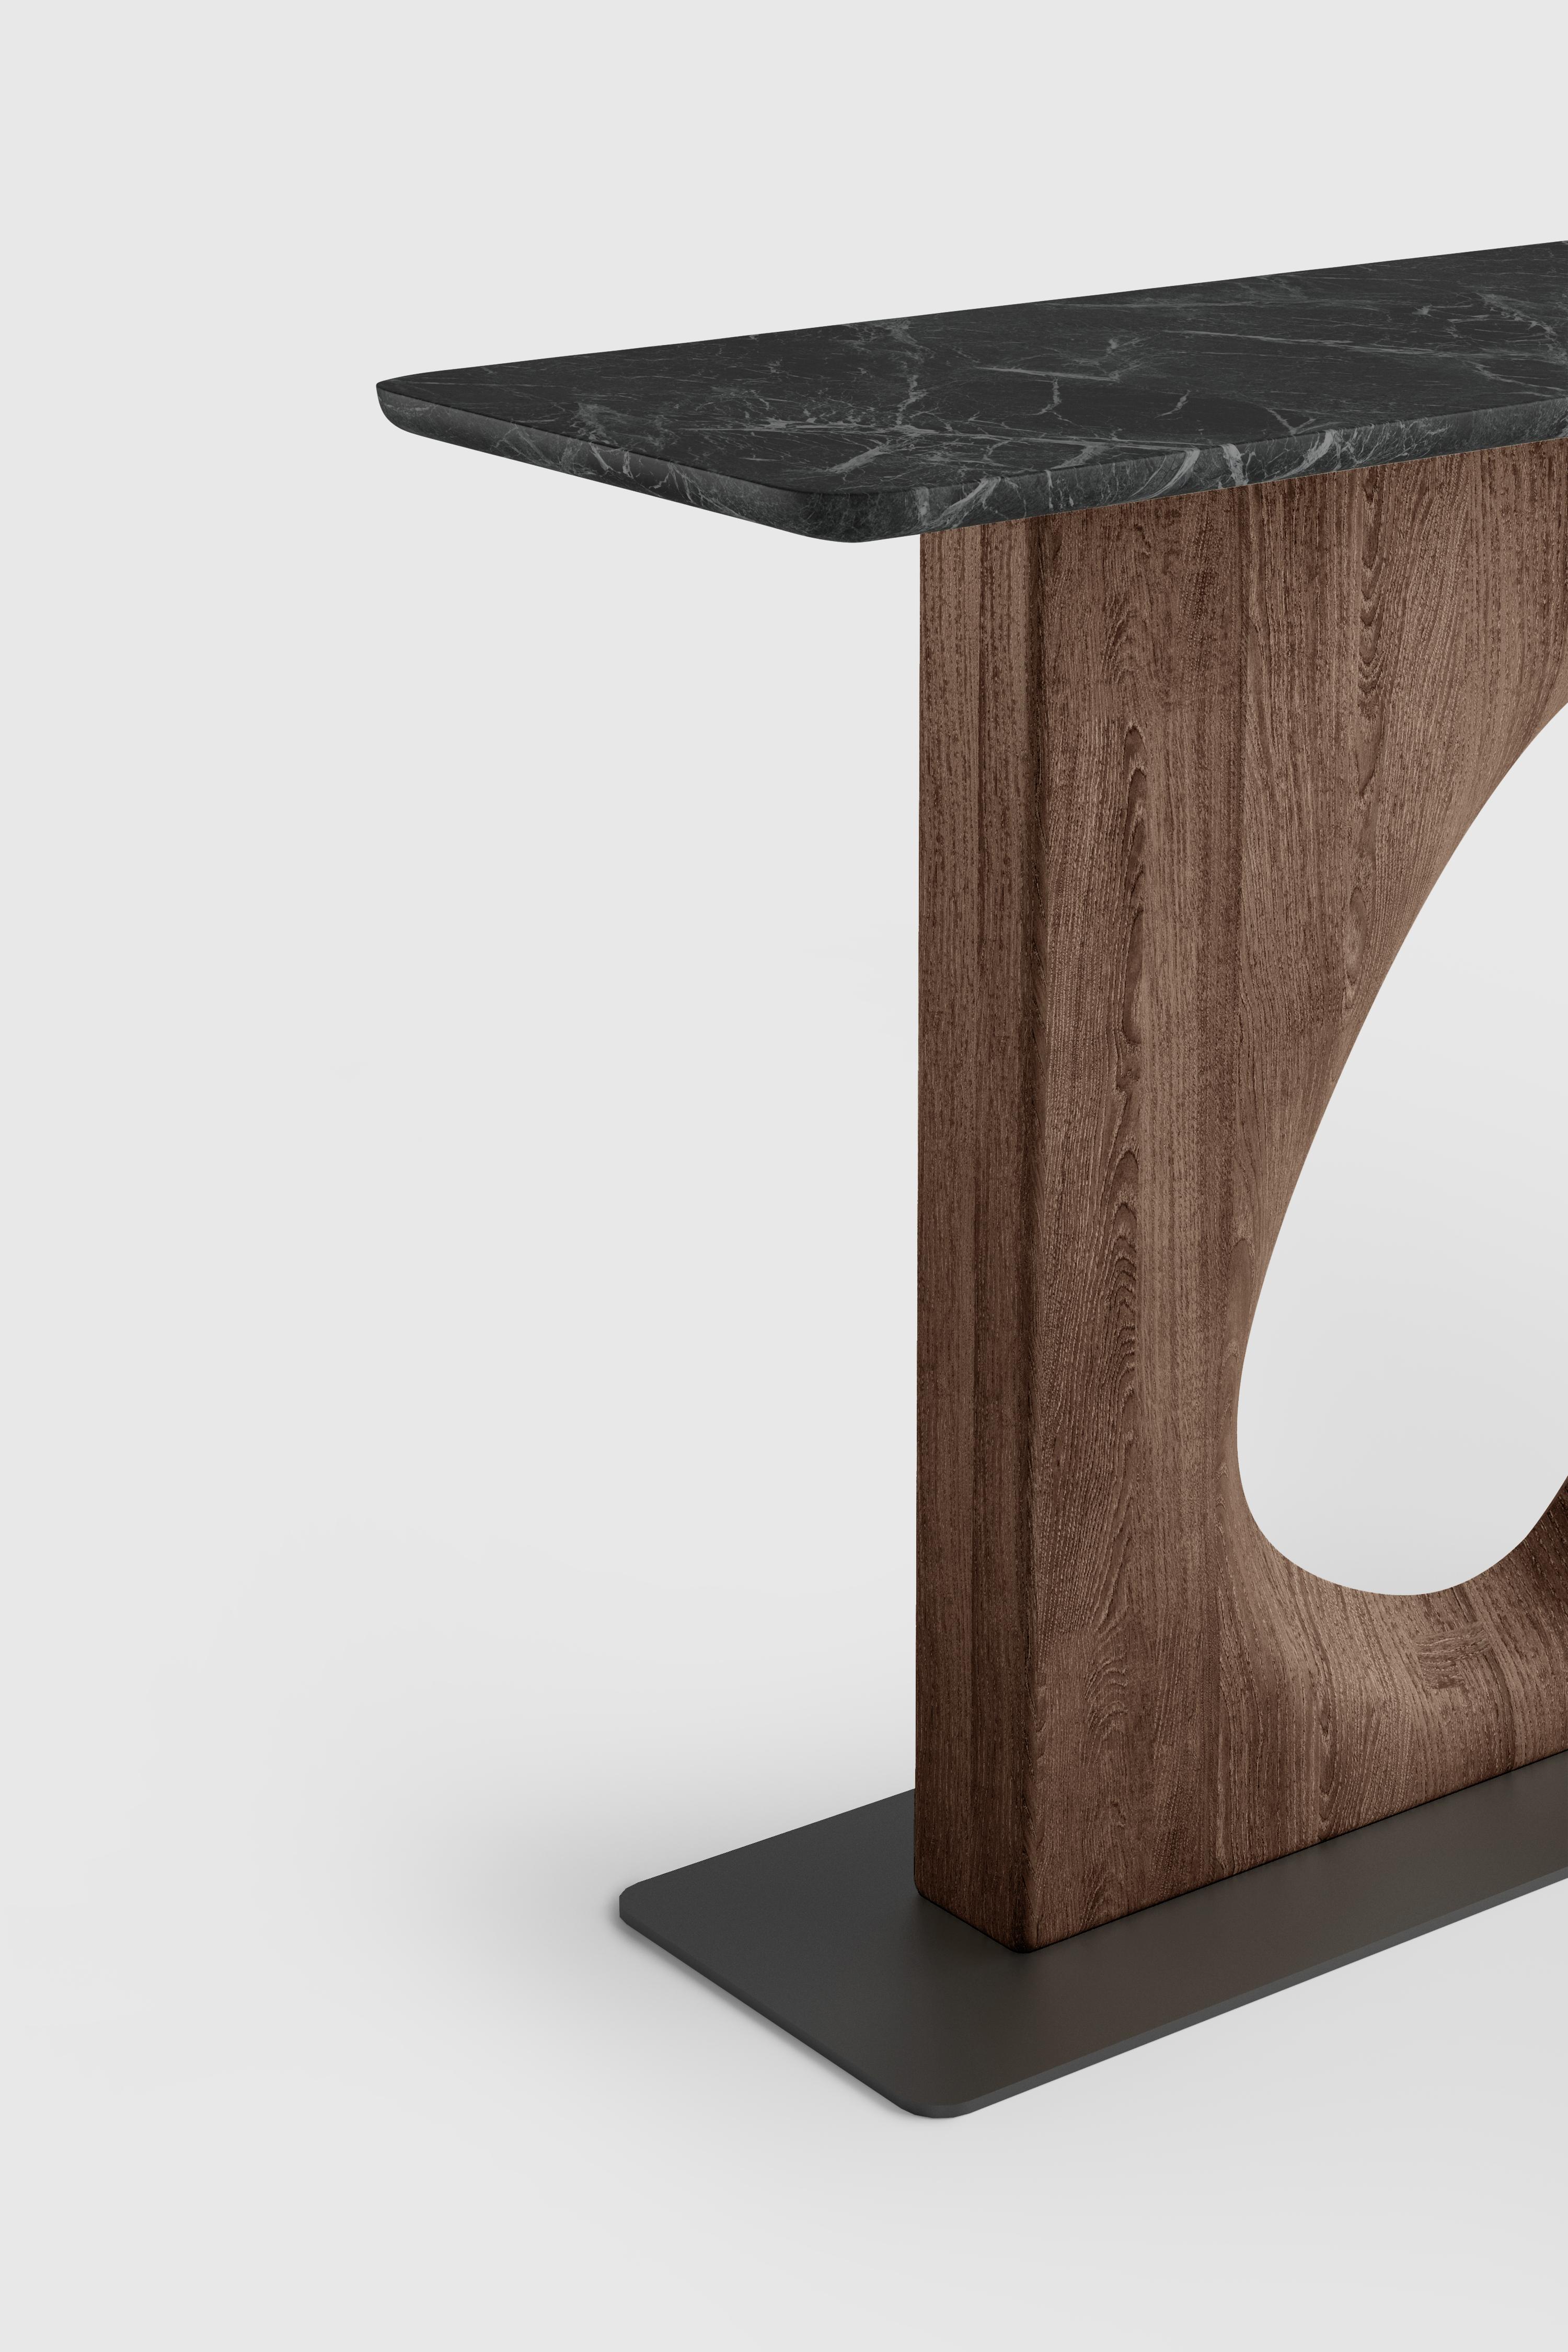 Noviembre XIX, Console Table in Wood inspired by Brancusi, Sideboard by Joel Escalona 

The Noviembre collection is inspired by the creative values of Constantin Brancusi, a Romanian sculptor considered one of the most influential artists of the